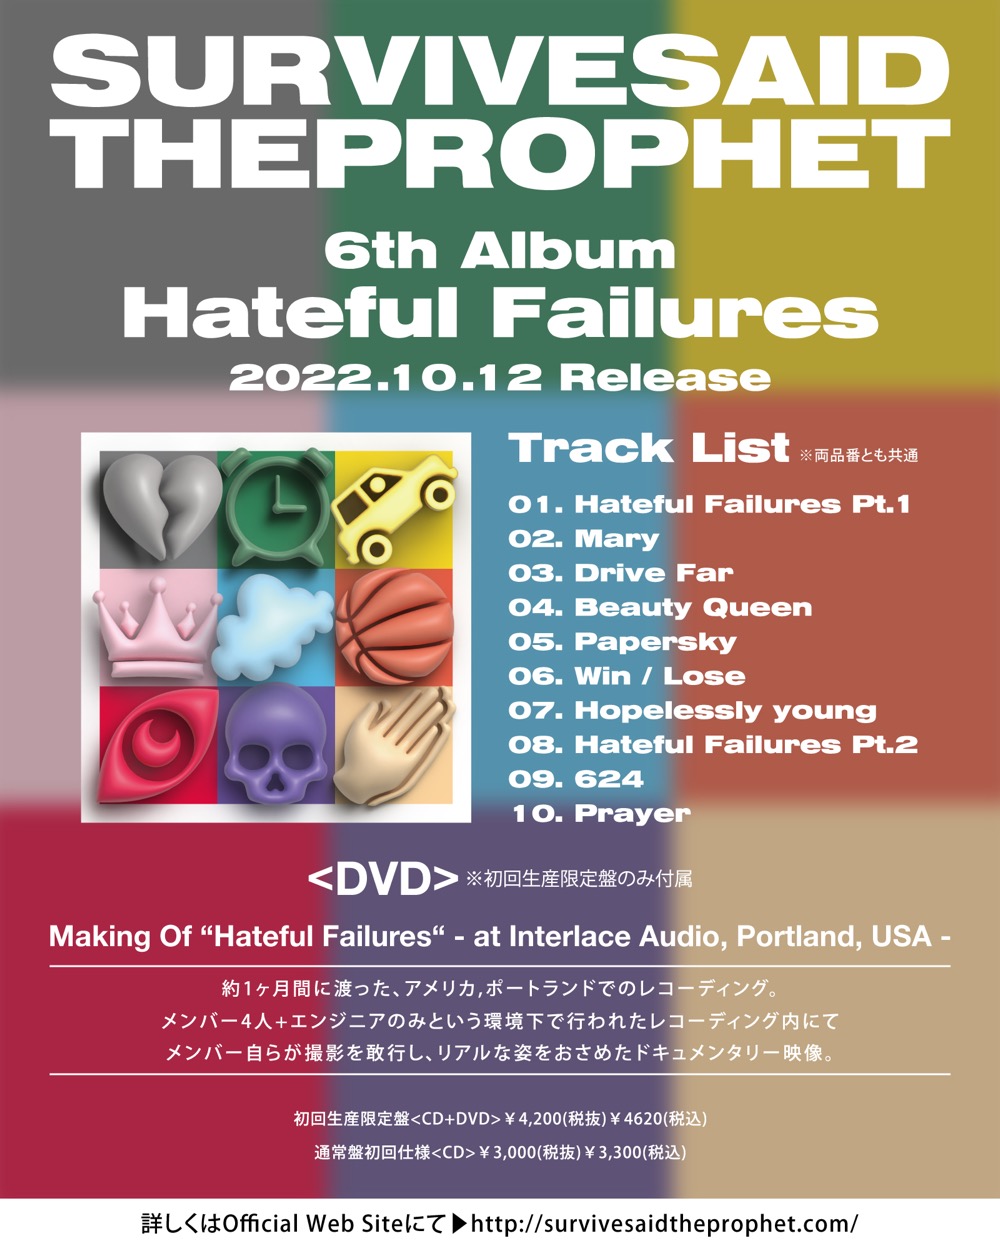 Survive Said The Prophet、6thアルバム『Hateful Failures』のティザー映像公開 - 画像一覧（1/2）